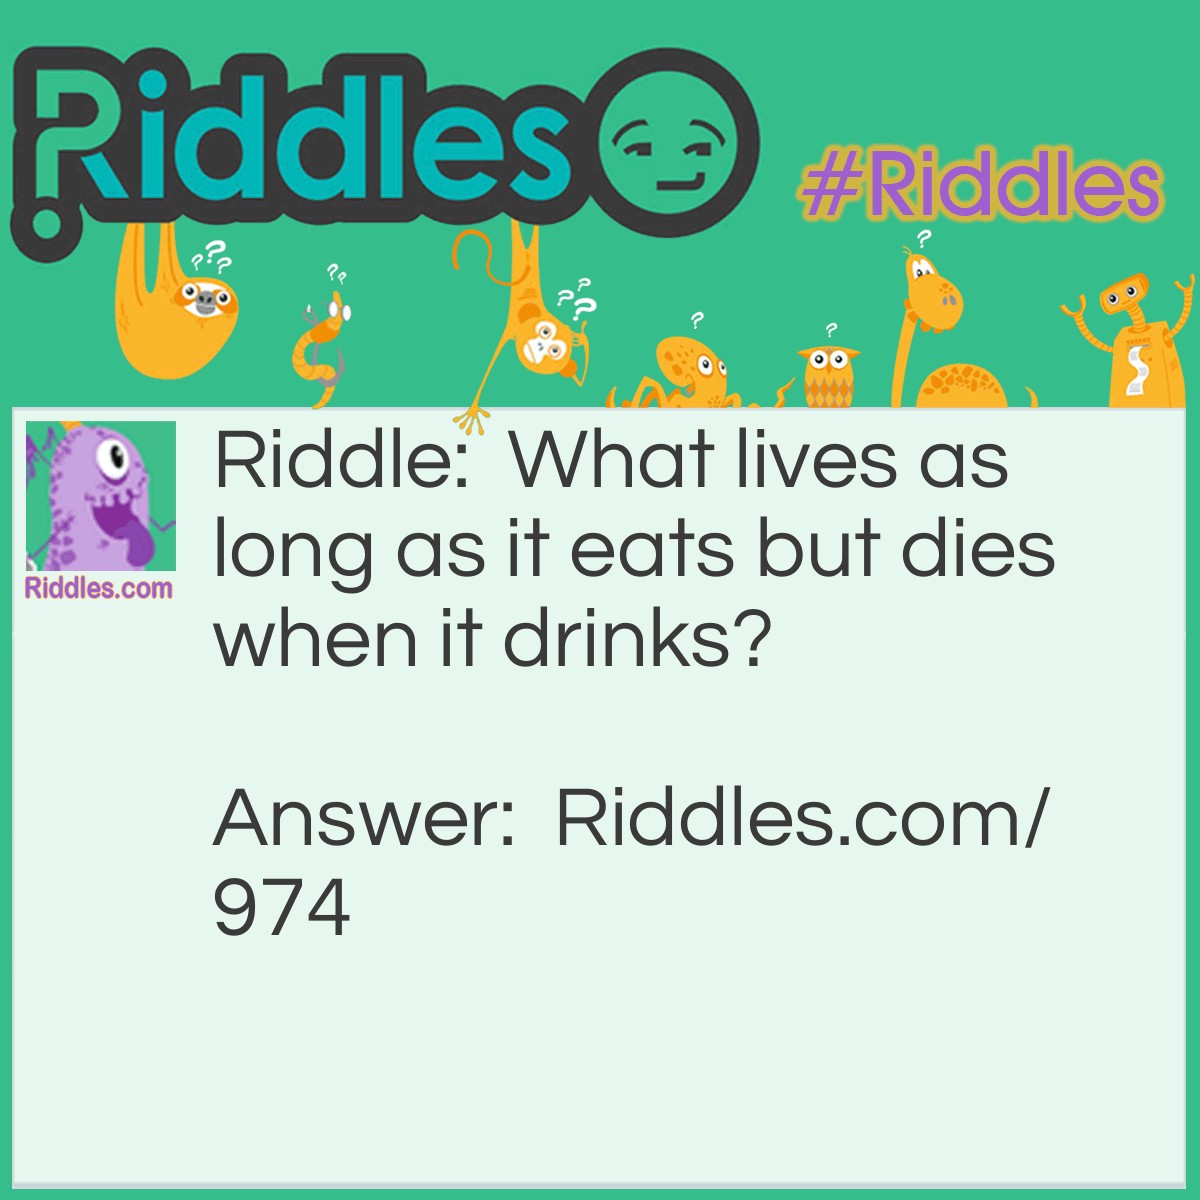 Riddle: What lives as long as it eats but dies when it drinks? Answer: Fire.